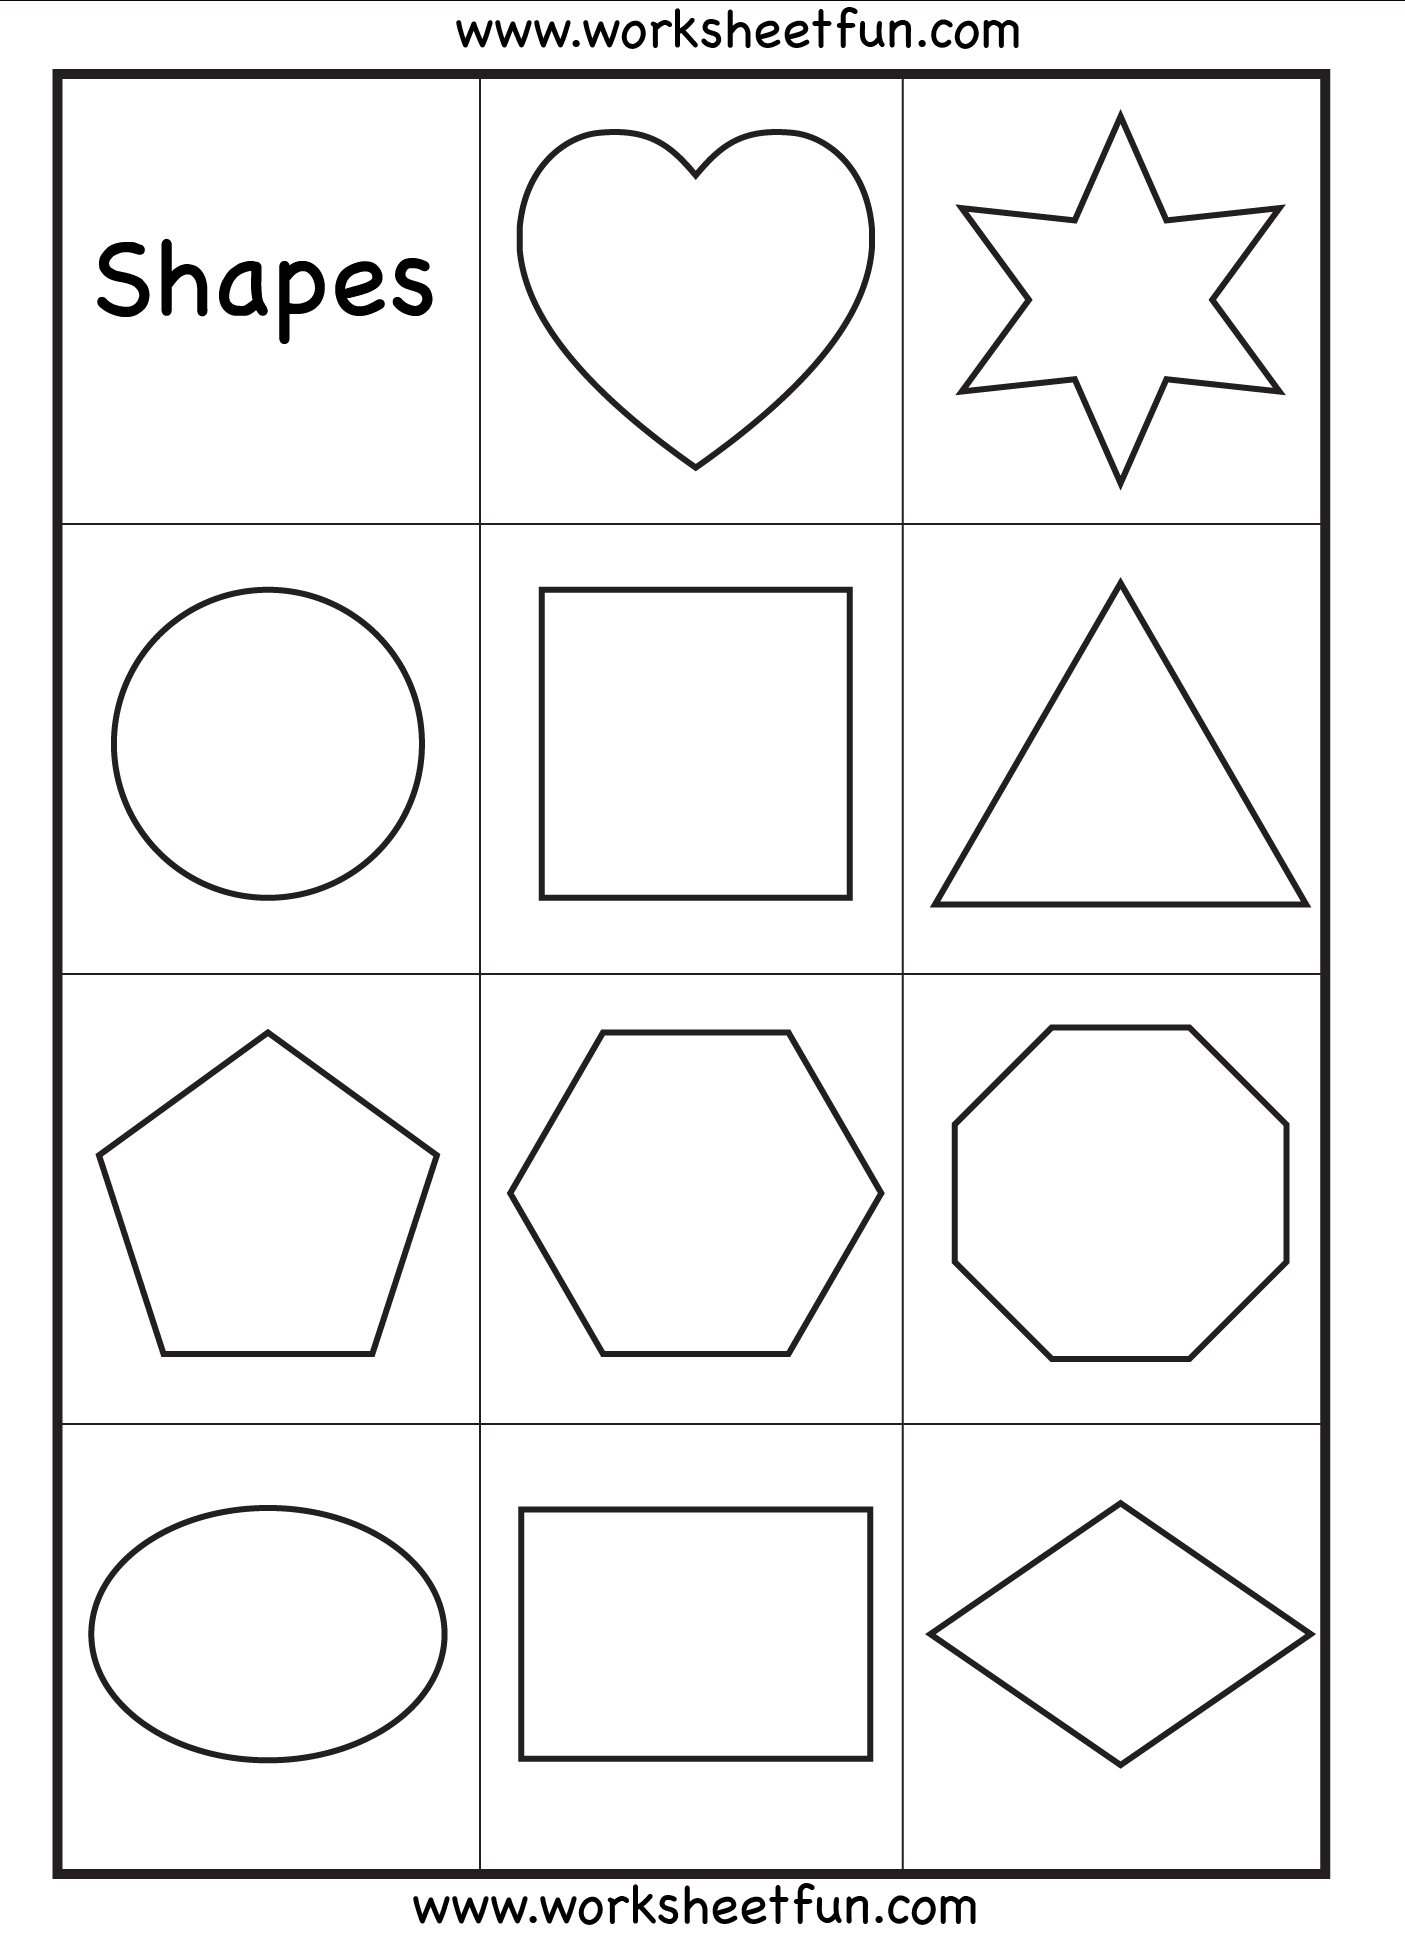 Preschool Shapes, Upper Case Letters, And Lower Case Letters | Printable Shapes Worksheets